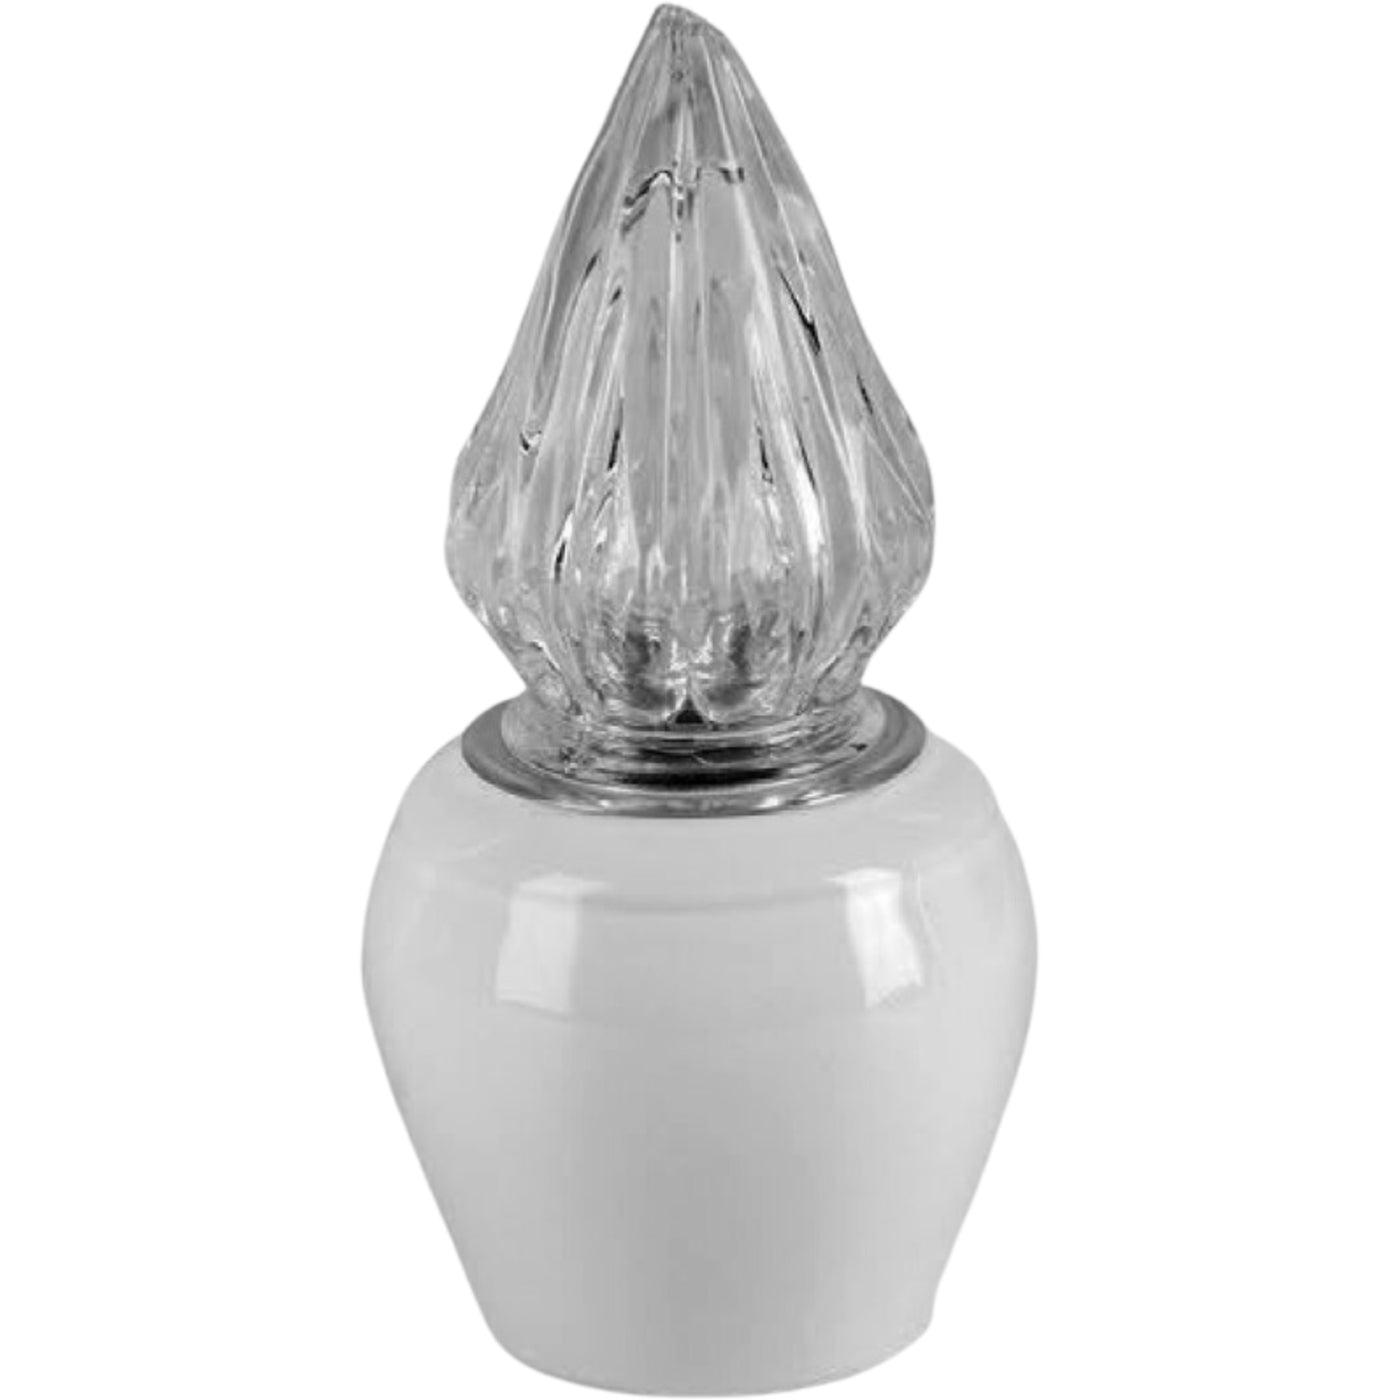 Grave light Liscia 10x10cm - 3.9x3.9in In white porcelain, wall attached LI146P